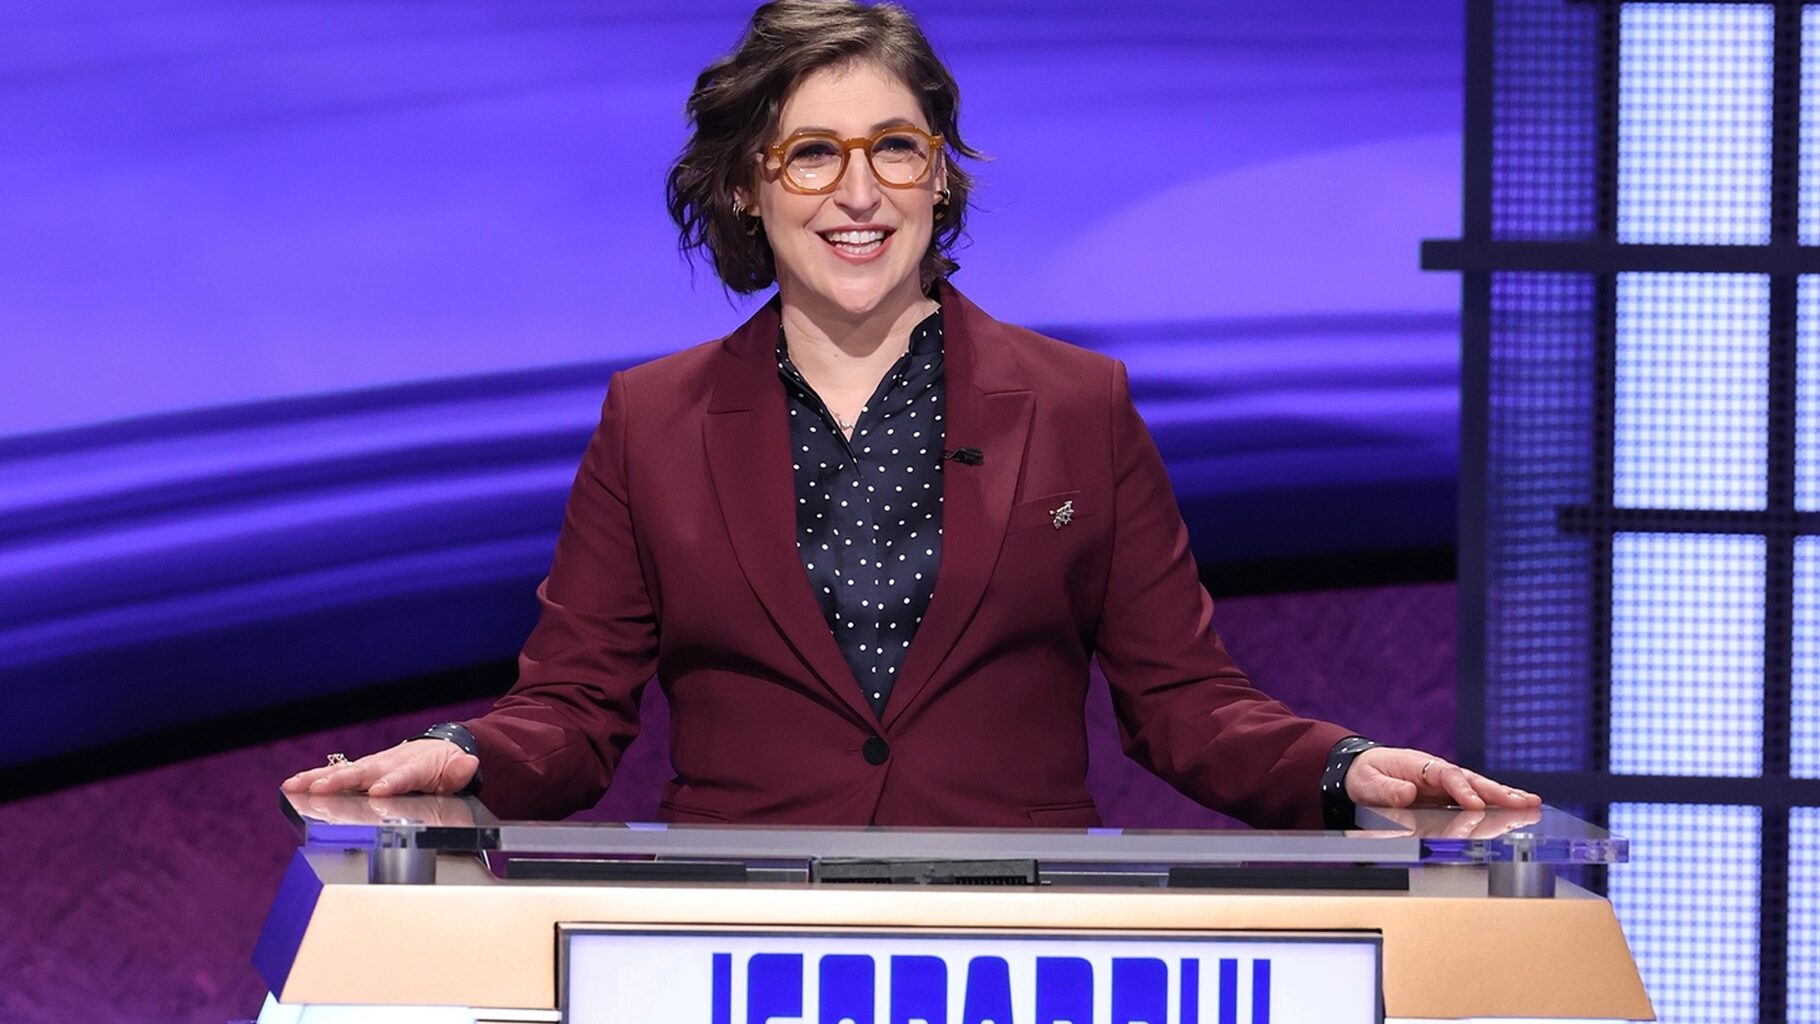 Mayim Bialik Reacts To The Controversial Campaign Targeting Her